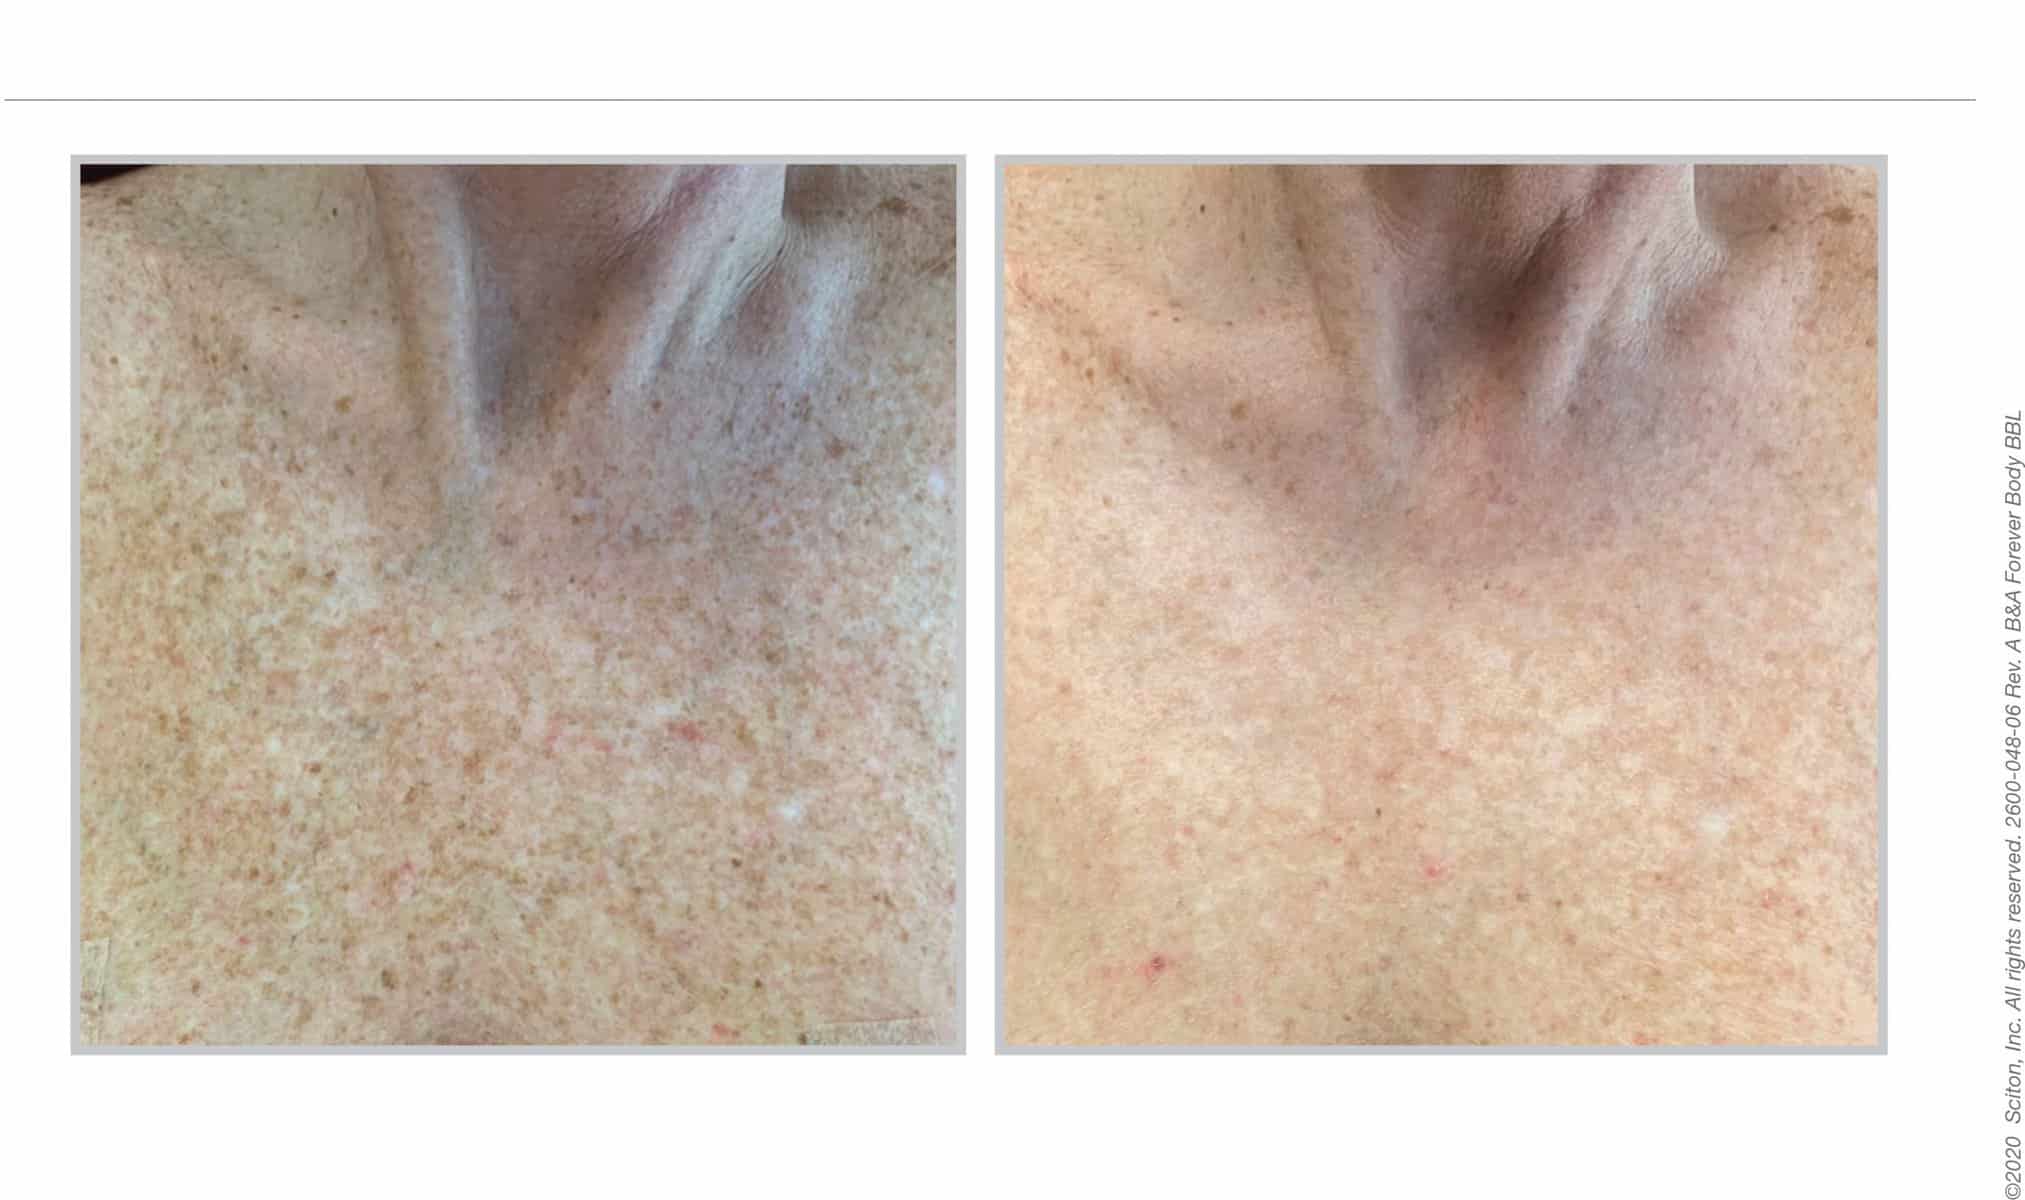 BBL decolletage treatment, before and after 13